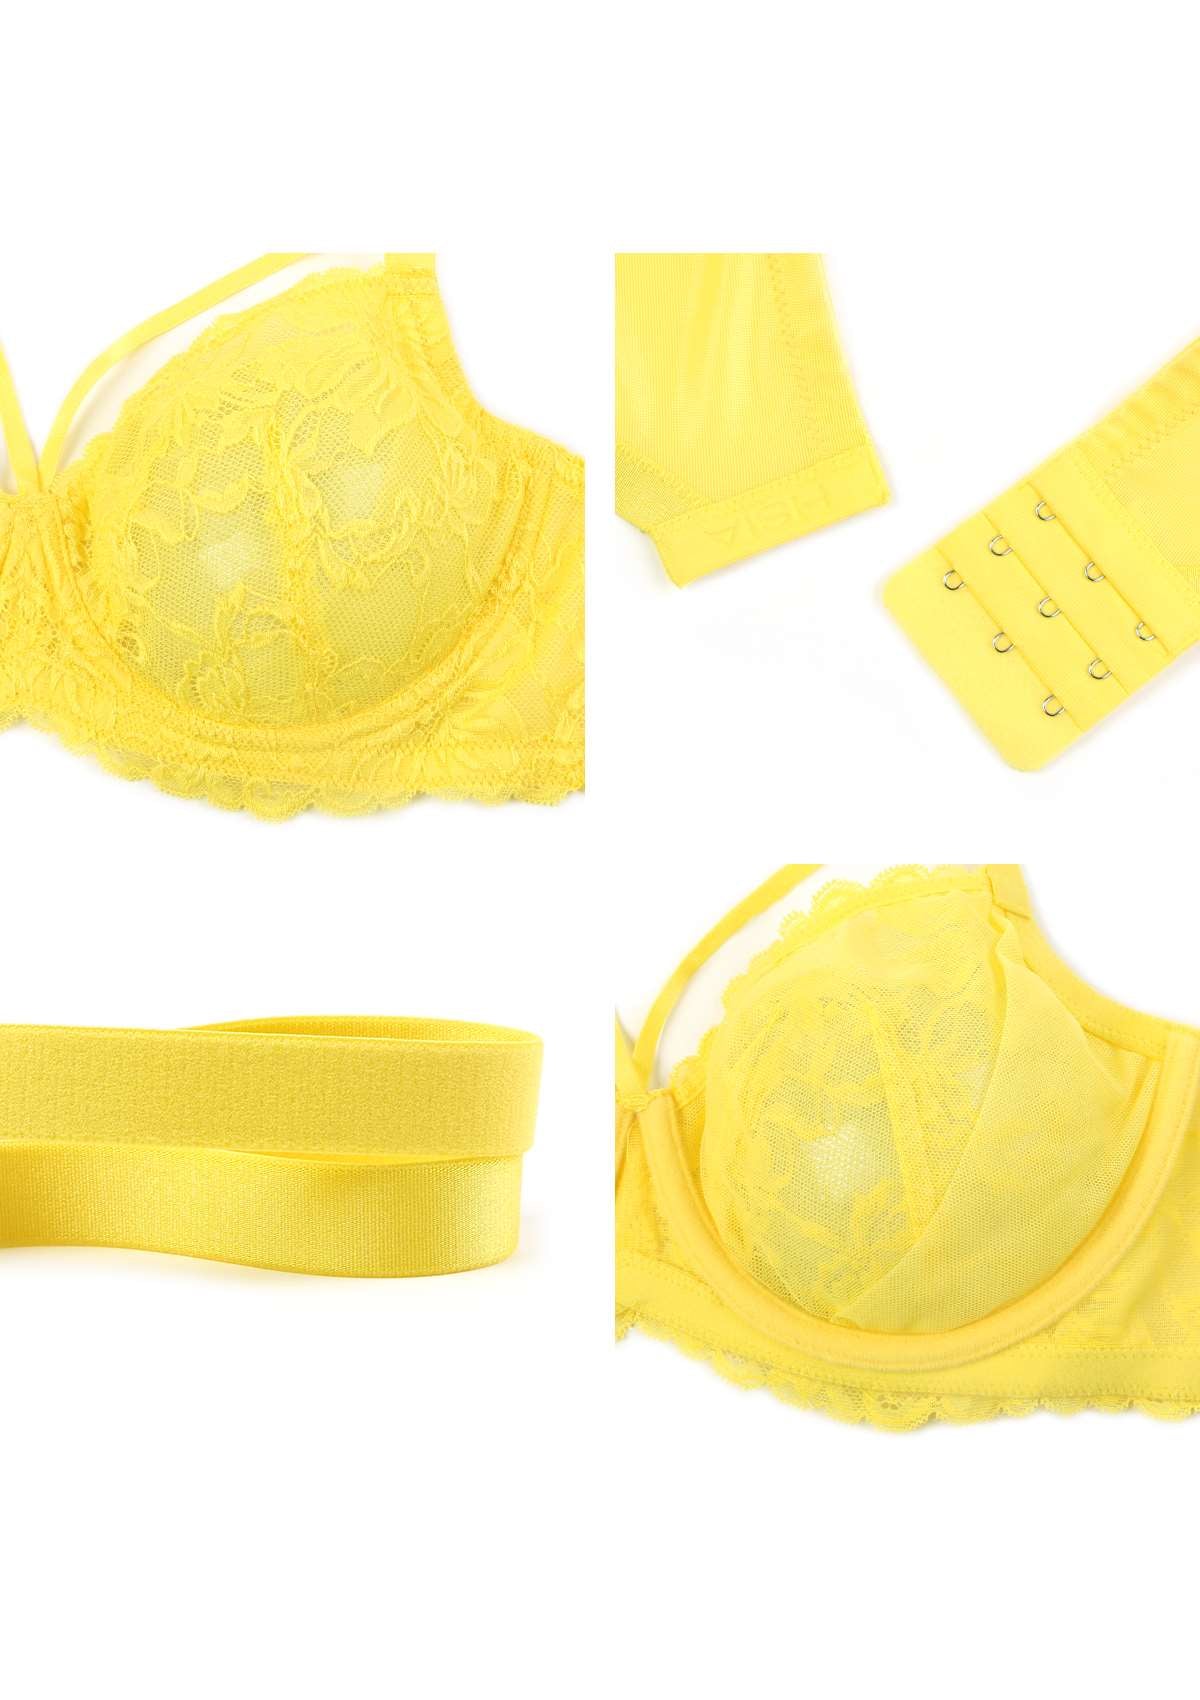 HSIA Unlined Lace Mesh Minimizer Bra For Large Breasts, Full Coverage - Bright Yellow / 36 / DDD/F